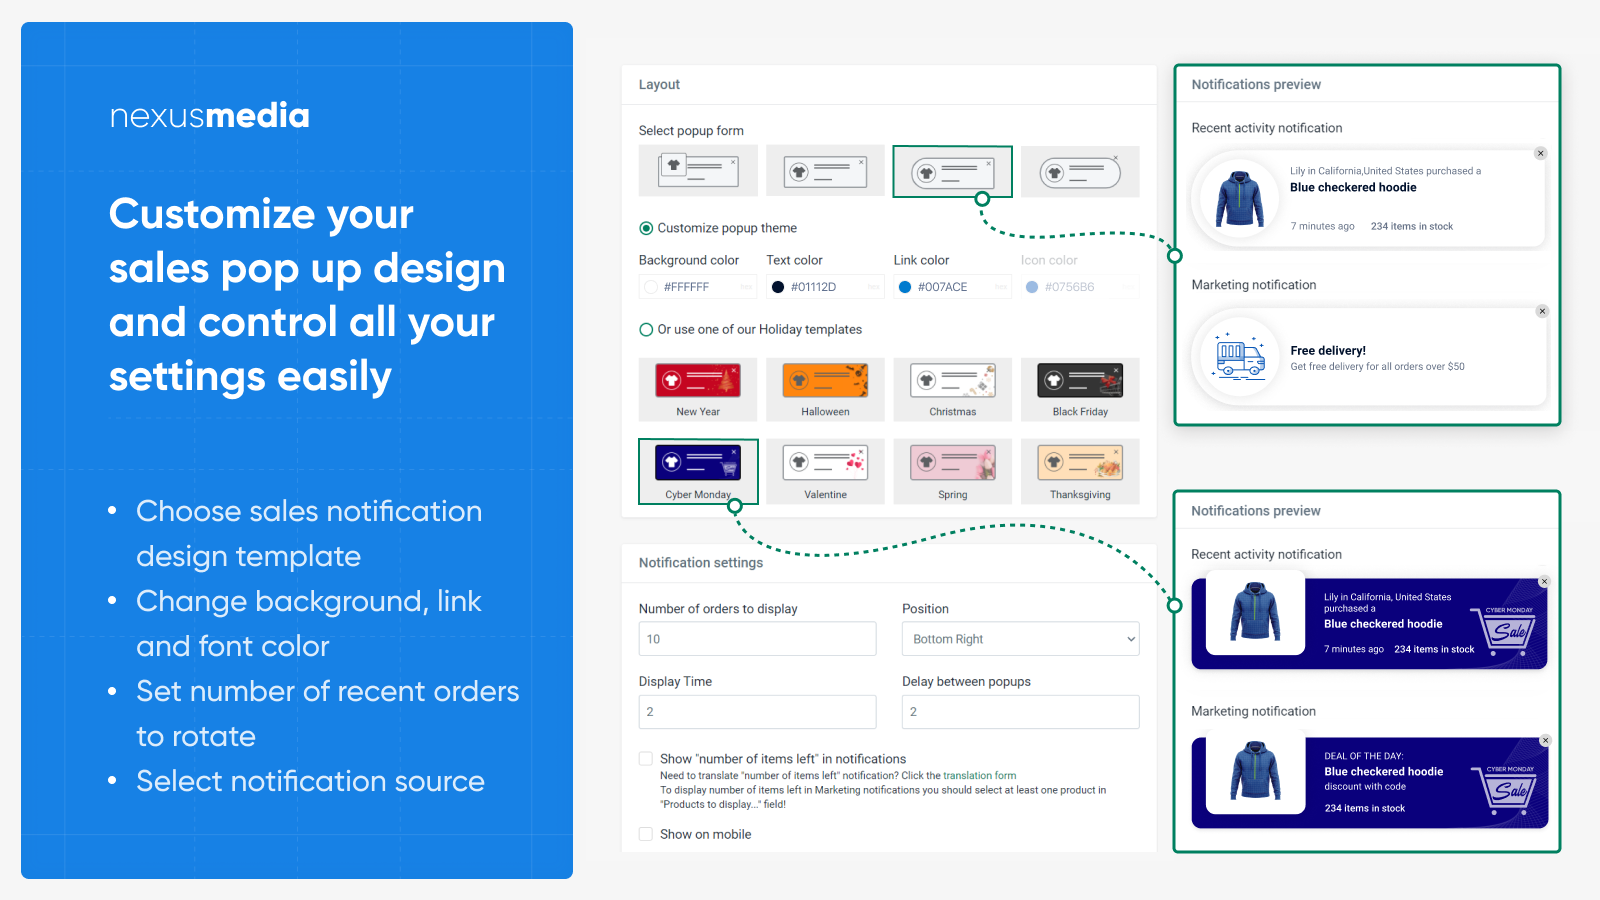 Customize your sales pop up shopify design and control settings 